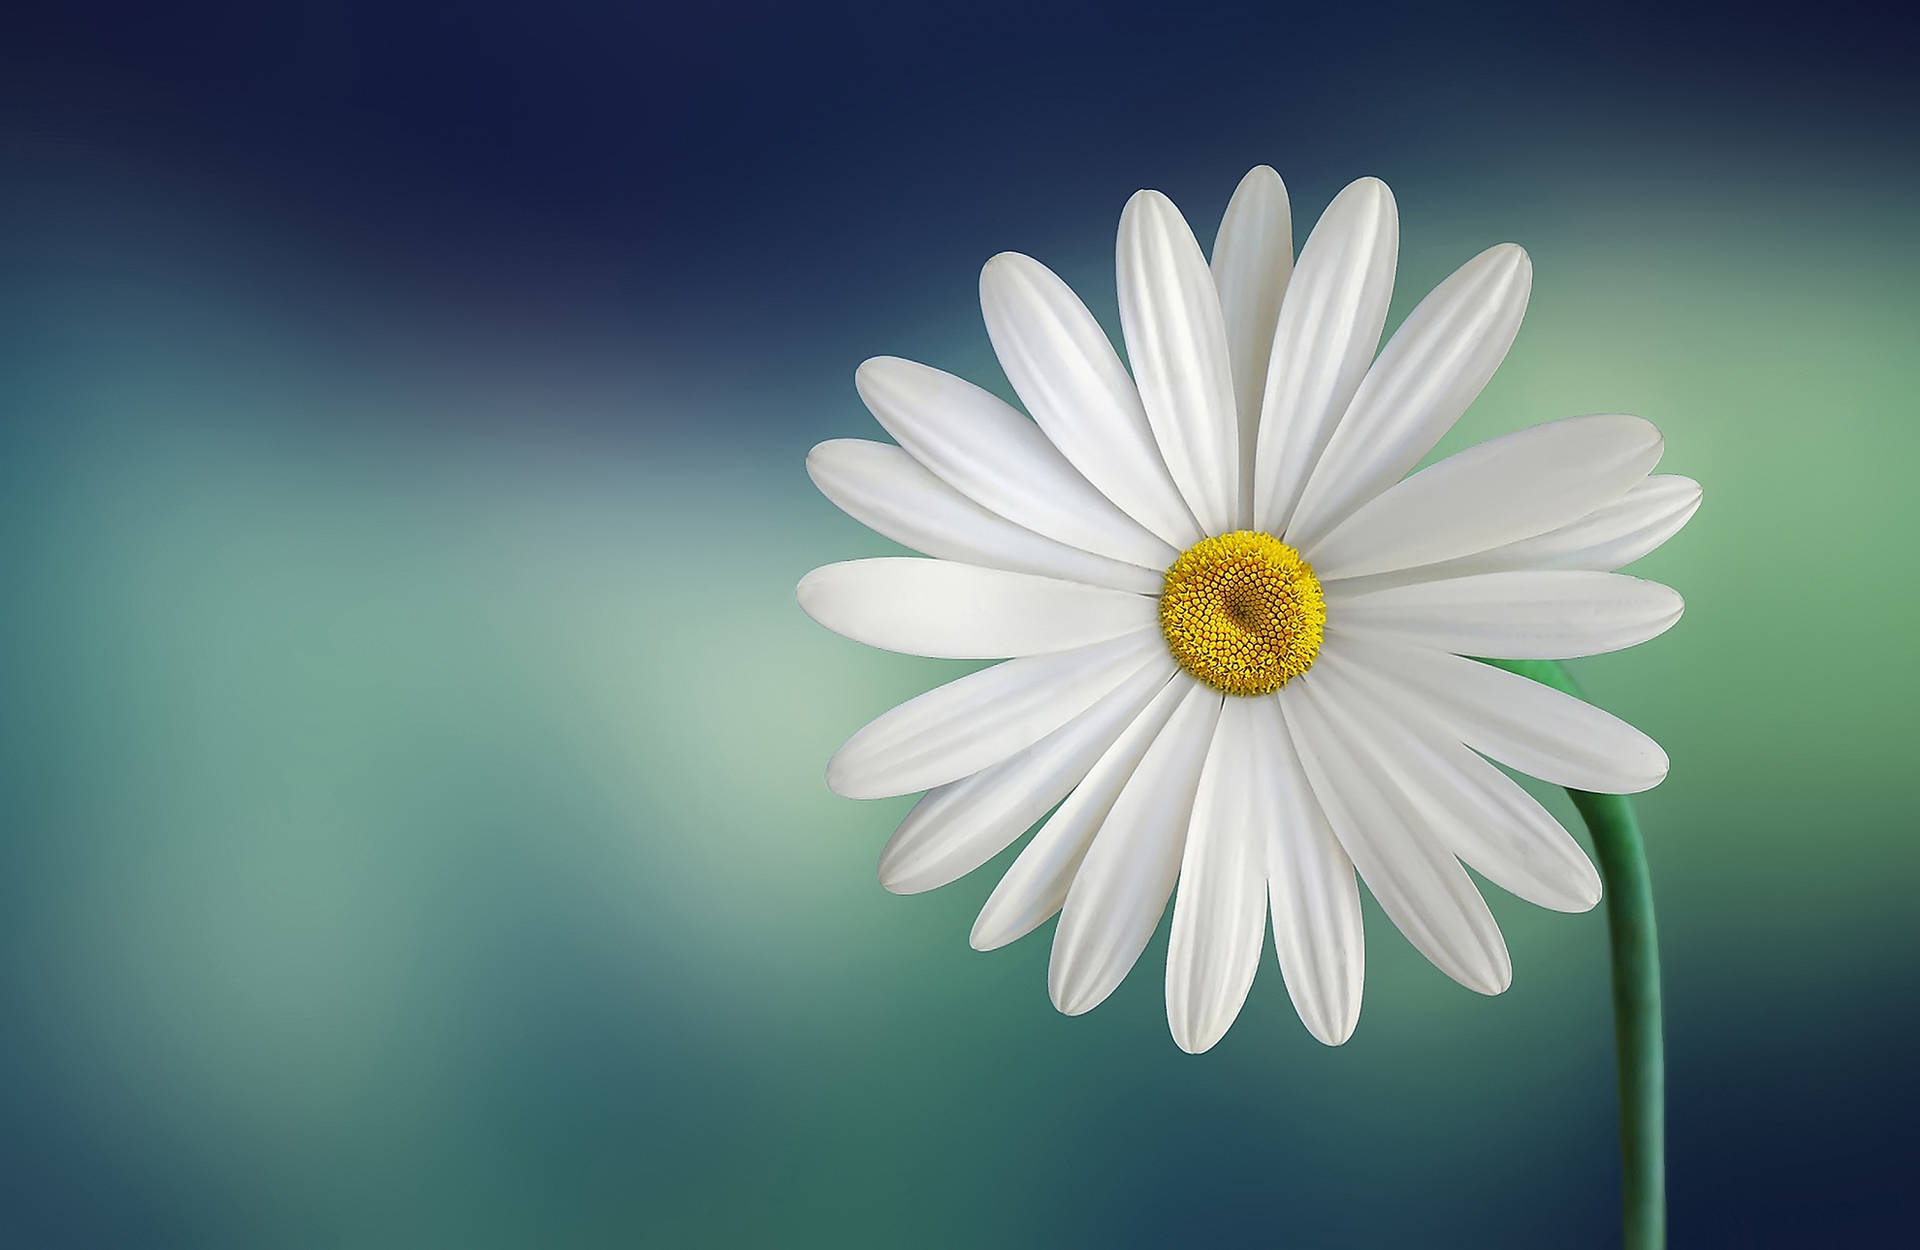 Daisy With Small Disc 4k Background